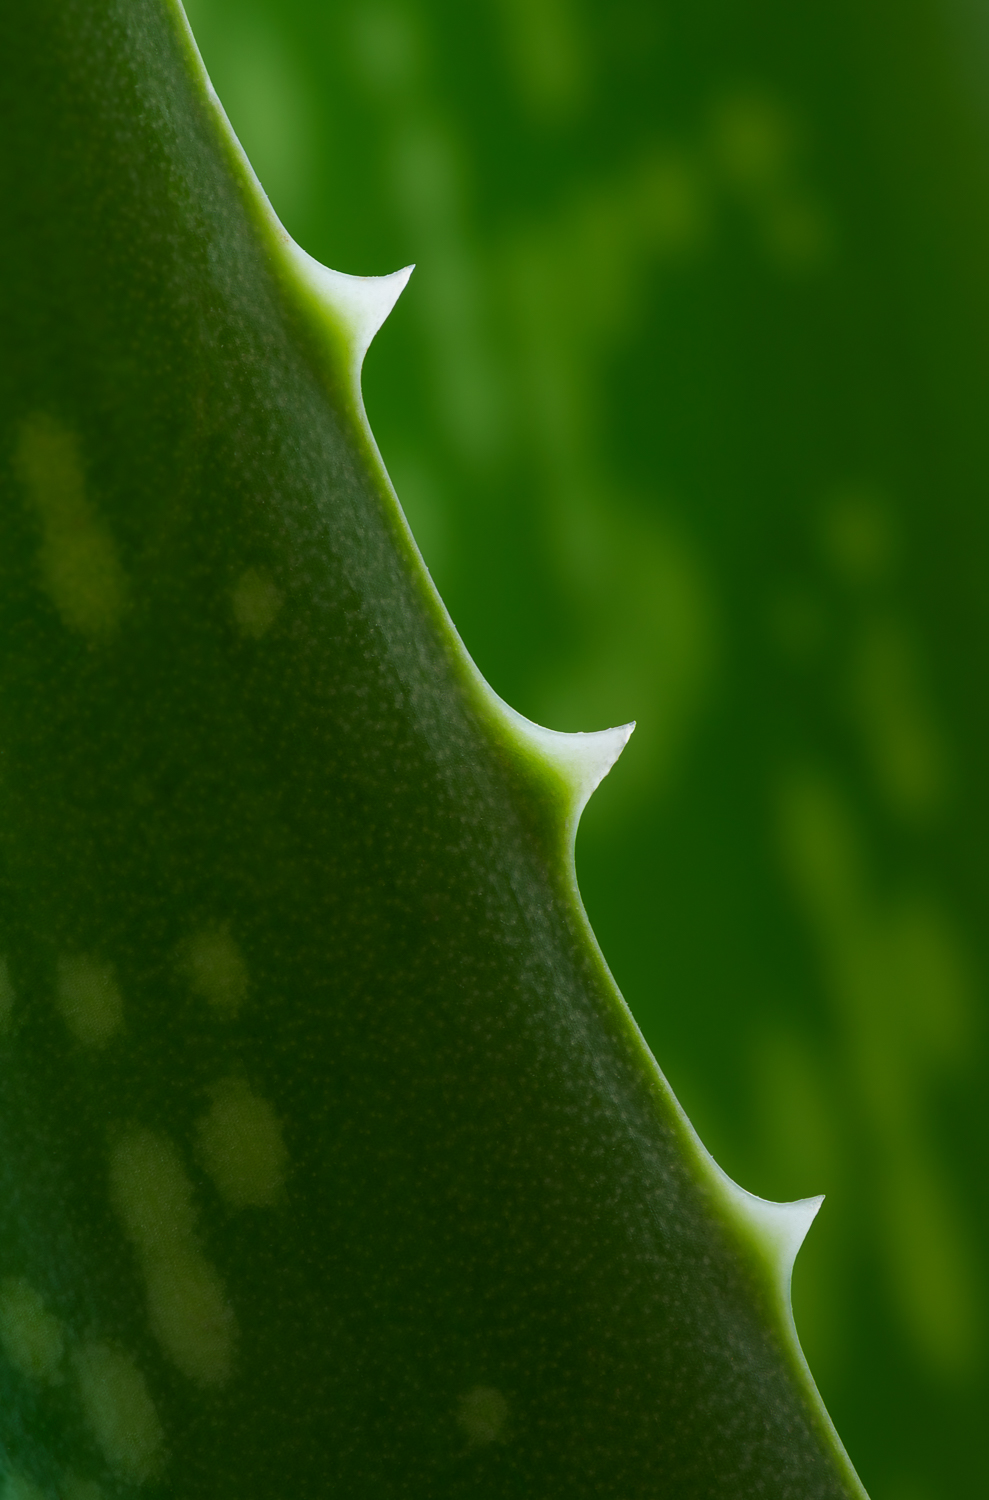 Backlighting adds emphasis to the spines or teeth on the edge of an Aloe Vera 'leaf'. Image #1550